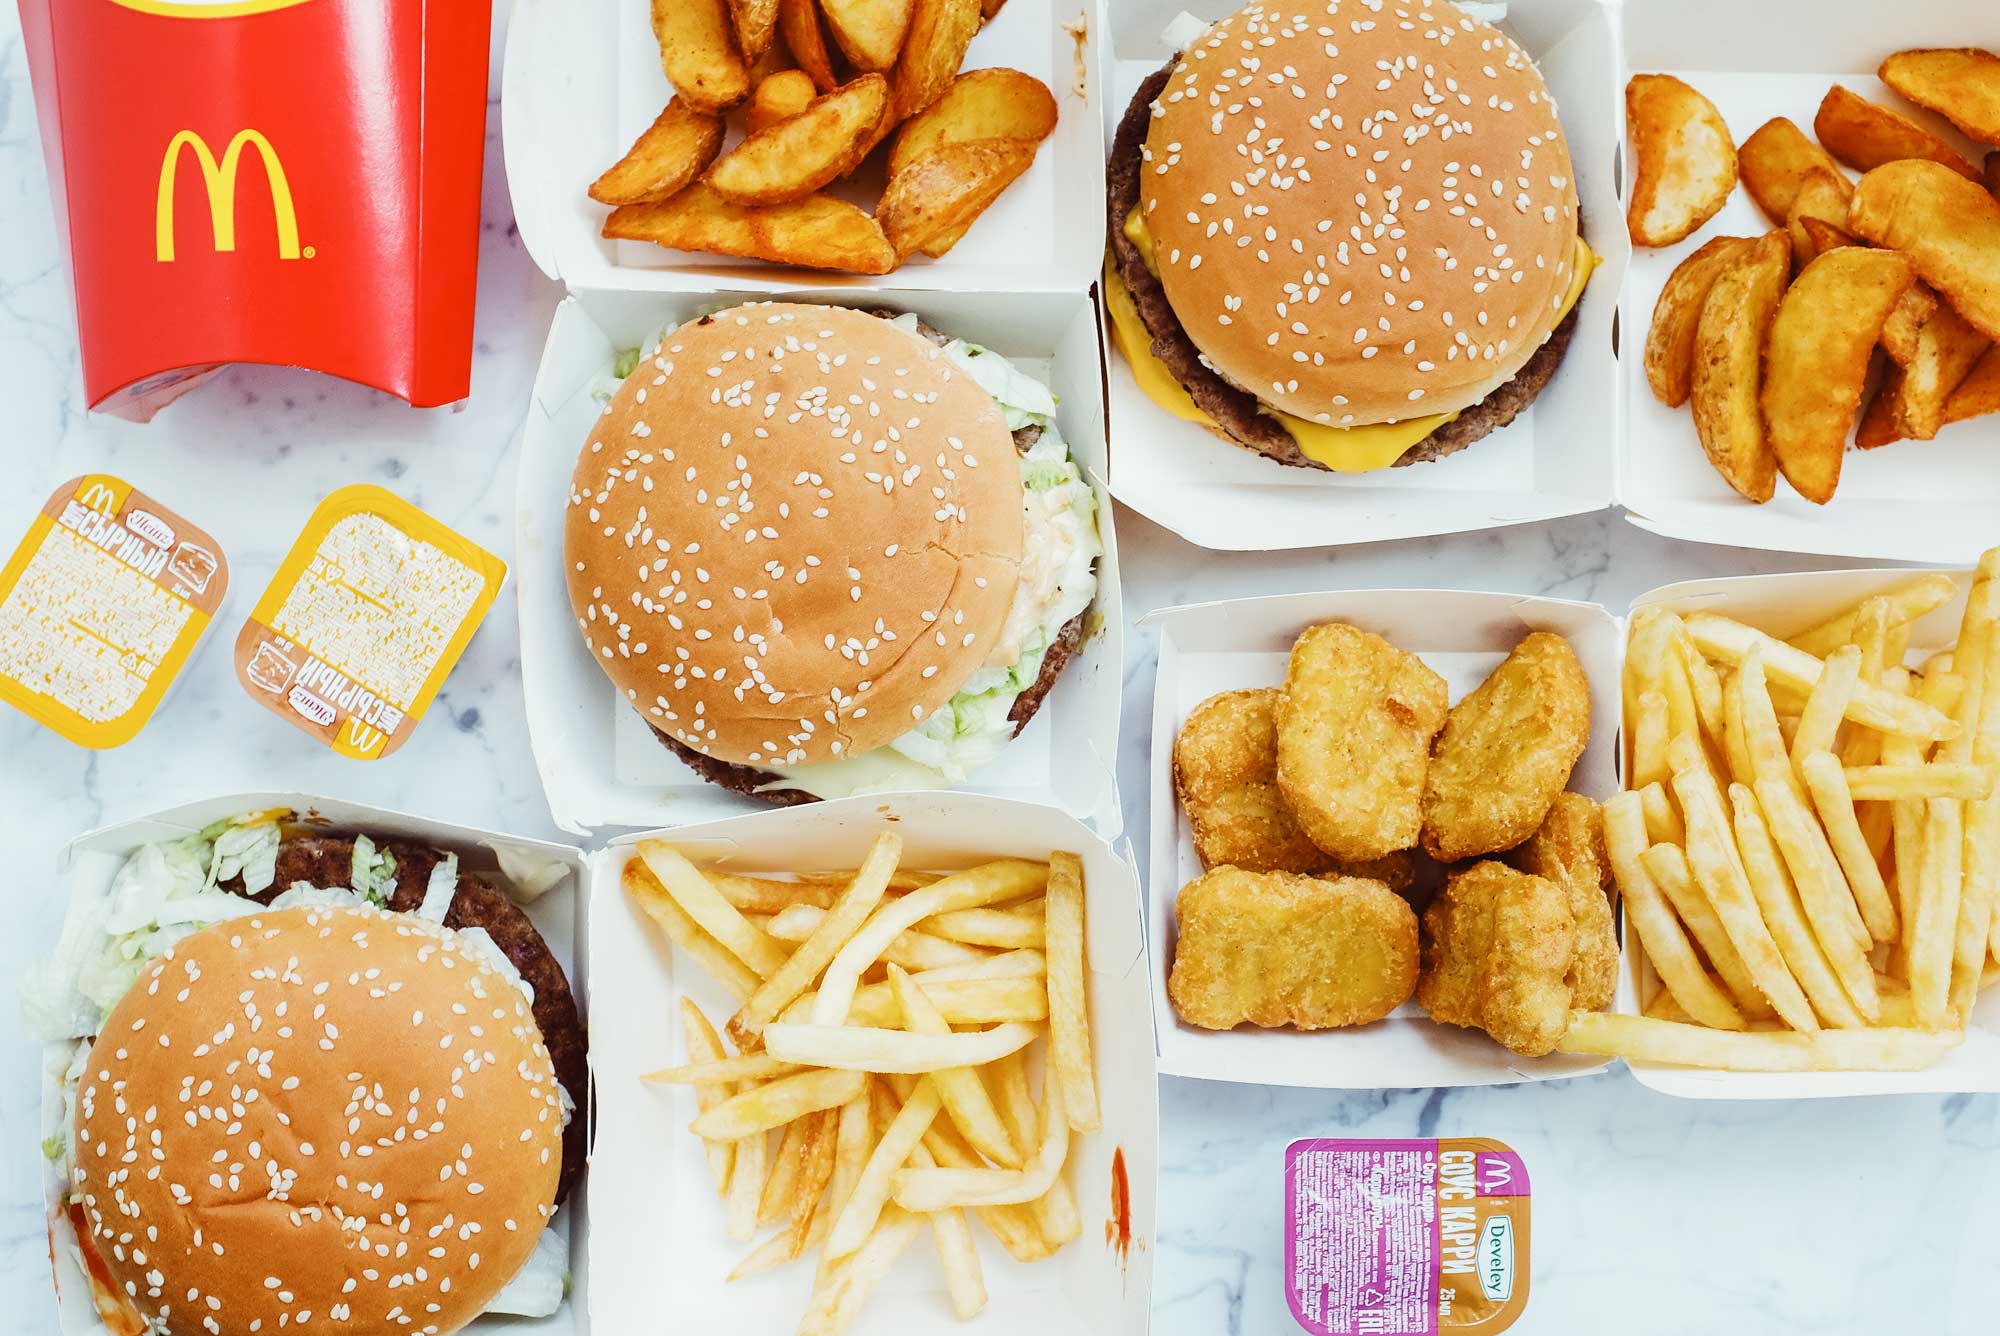 Image of unhealthy junk food on a table that are bad for nutrition